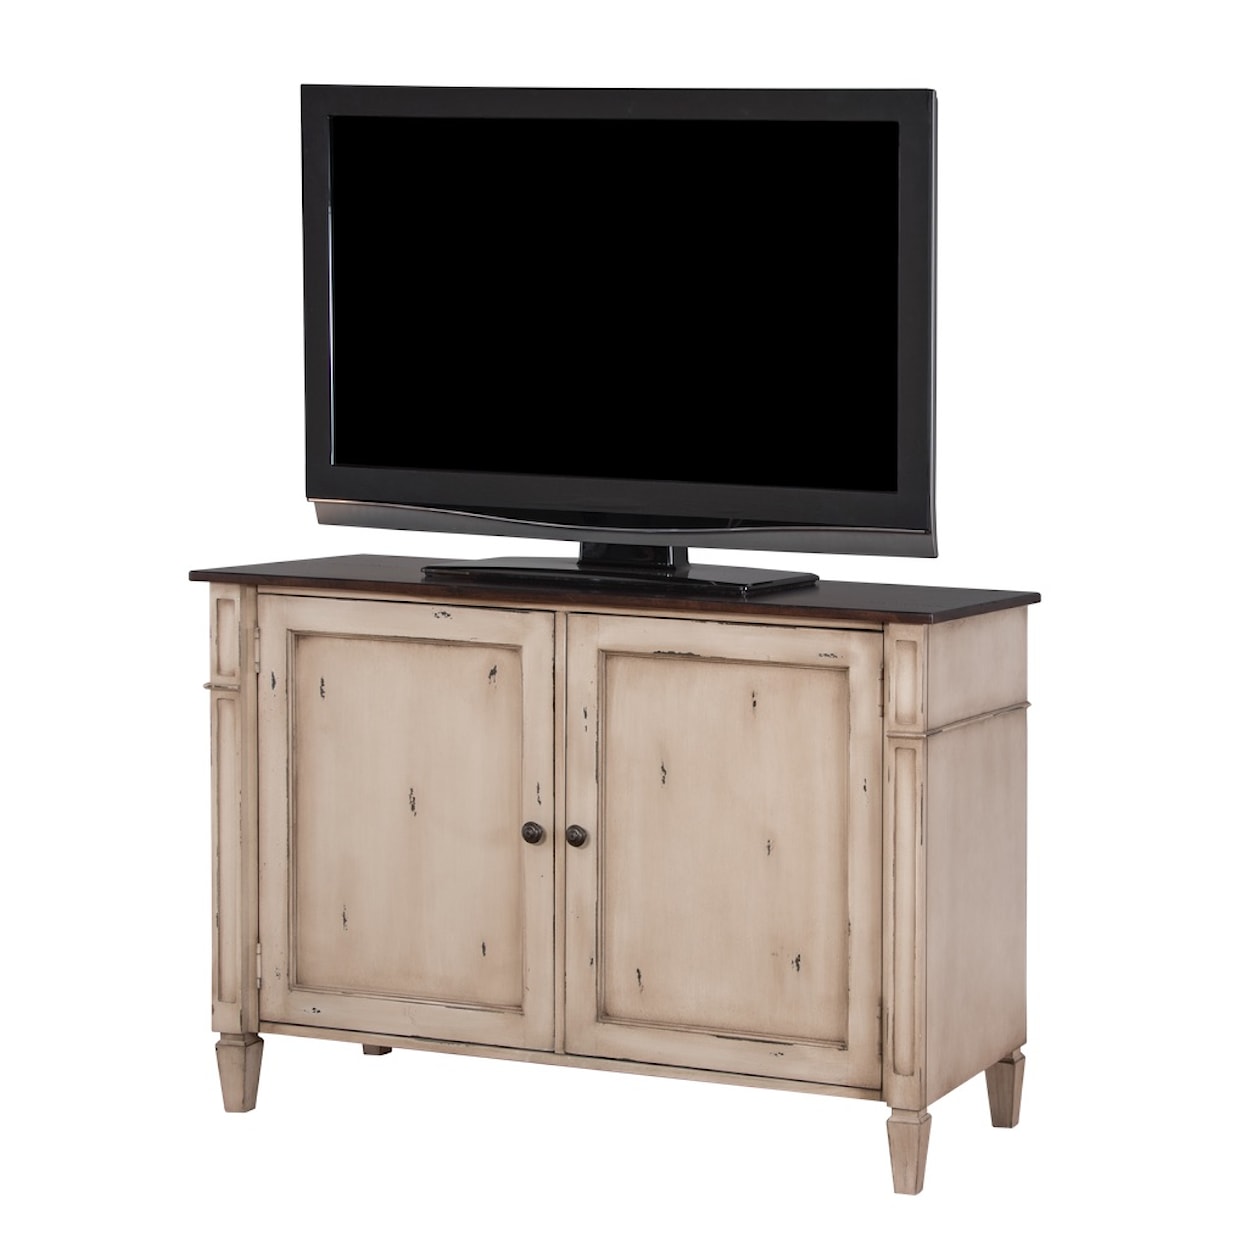 Martin Home Furnishings Eclectic Home Entertainment & Storage Storage Console